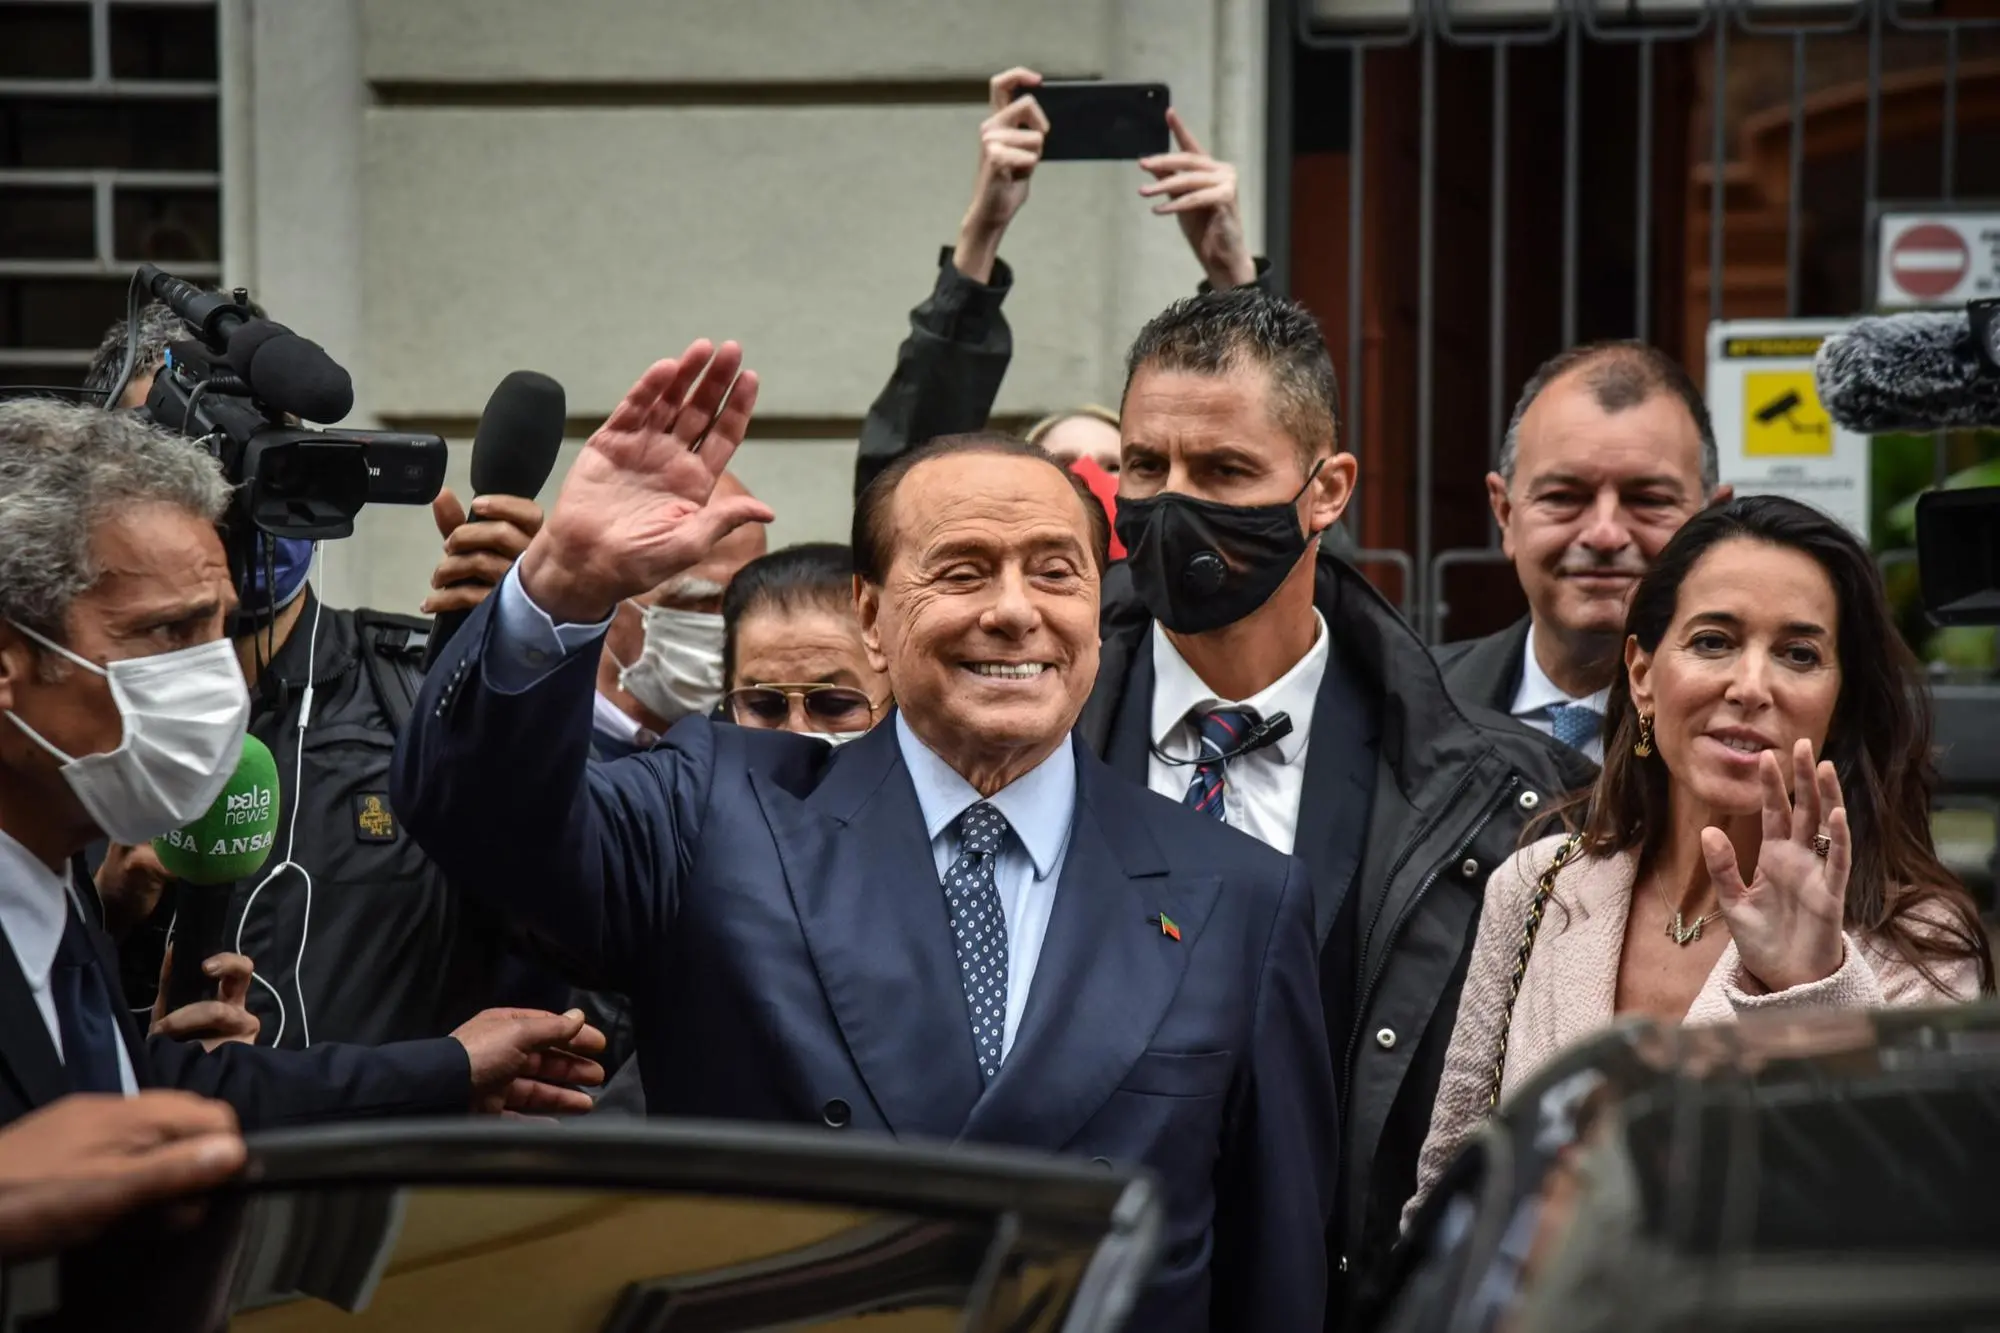 Former Italian Prime Minister and Forza Italia party leader, Silvio Berlusconi, flanked by vice president of the Forza Italia group in the Senate, Licia Ronzulli (R), after voting for municipal elections in Milan, Italy, 03 October 2021. Rome, Milan, Naples, Turin and Bologna hold municipal elections to elect new mayors and city councils on 03 and 04 October. ANSA/ MATTEO CORNER